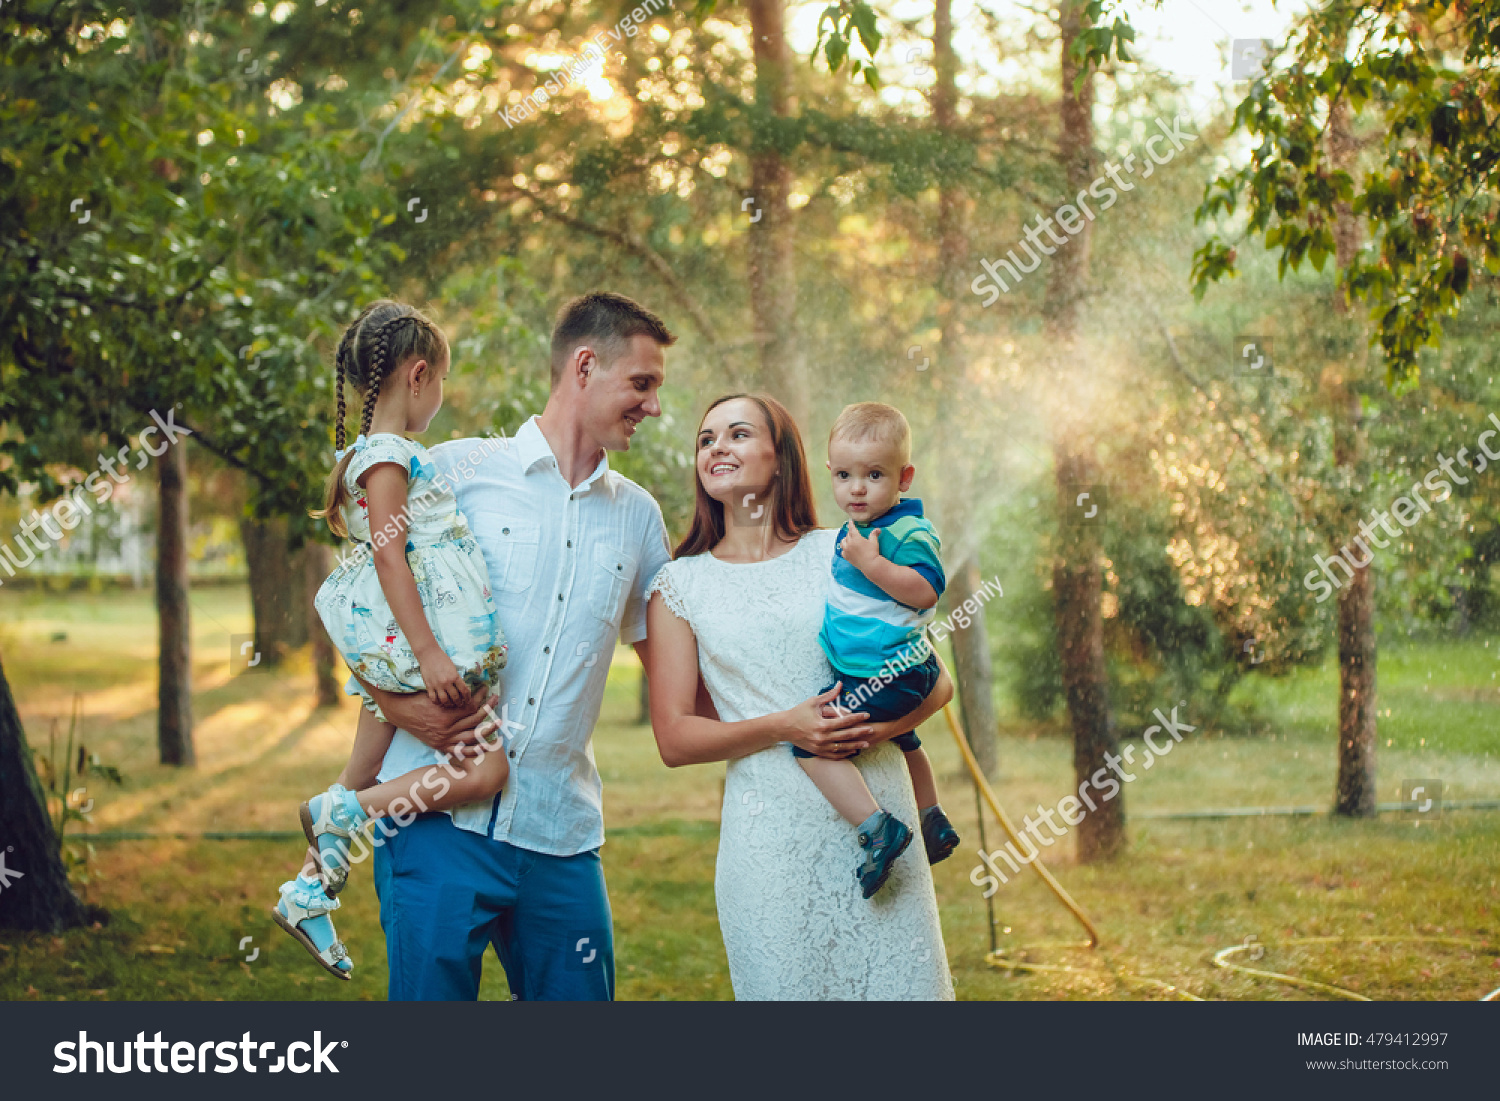 Happy young family of four people walking and having fun in the park #479412997